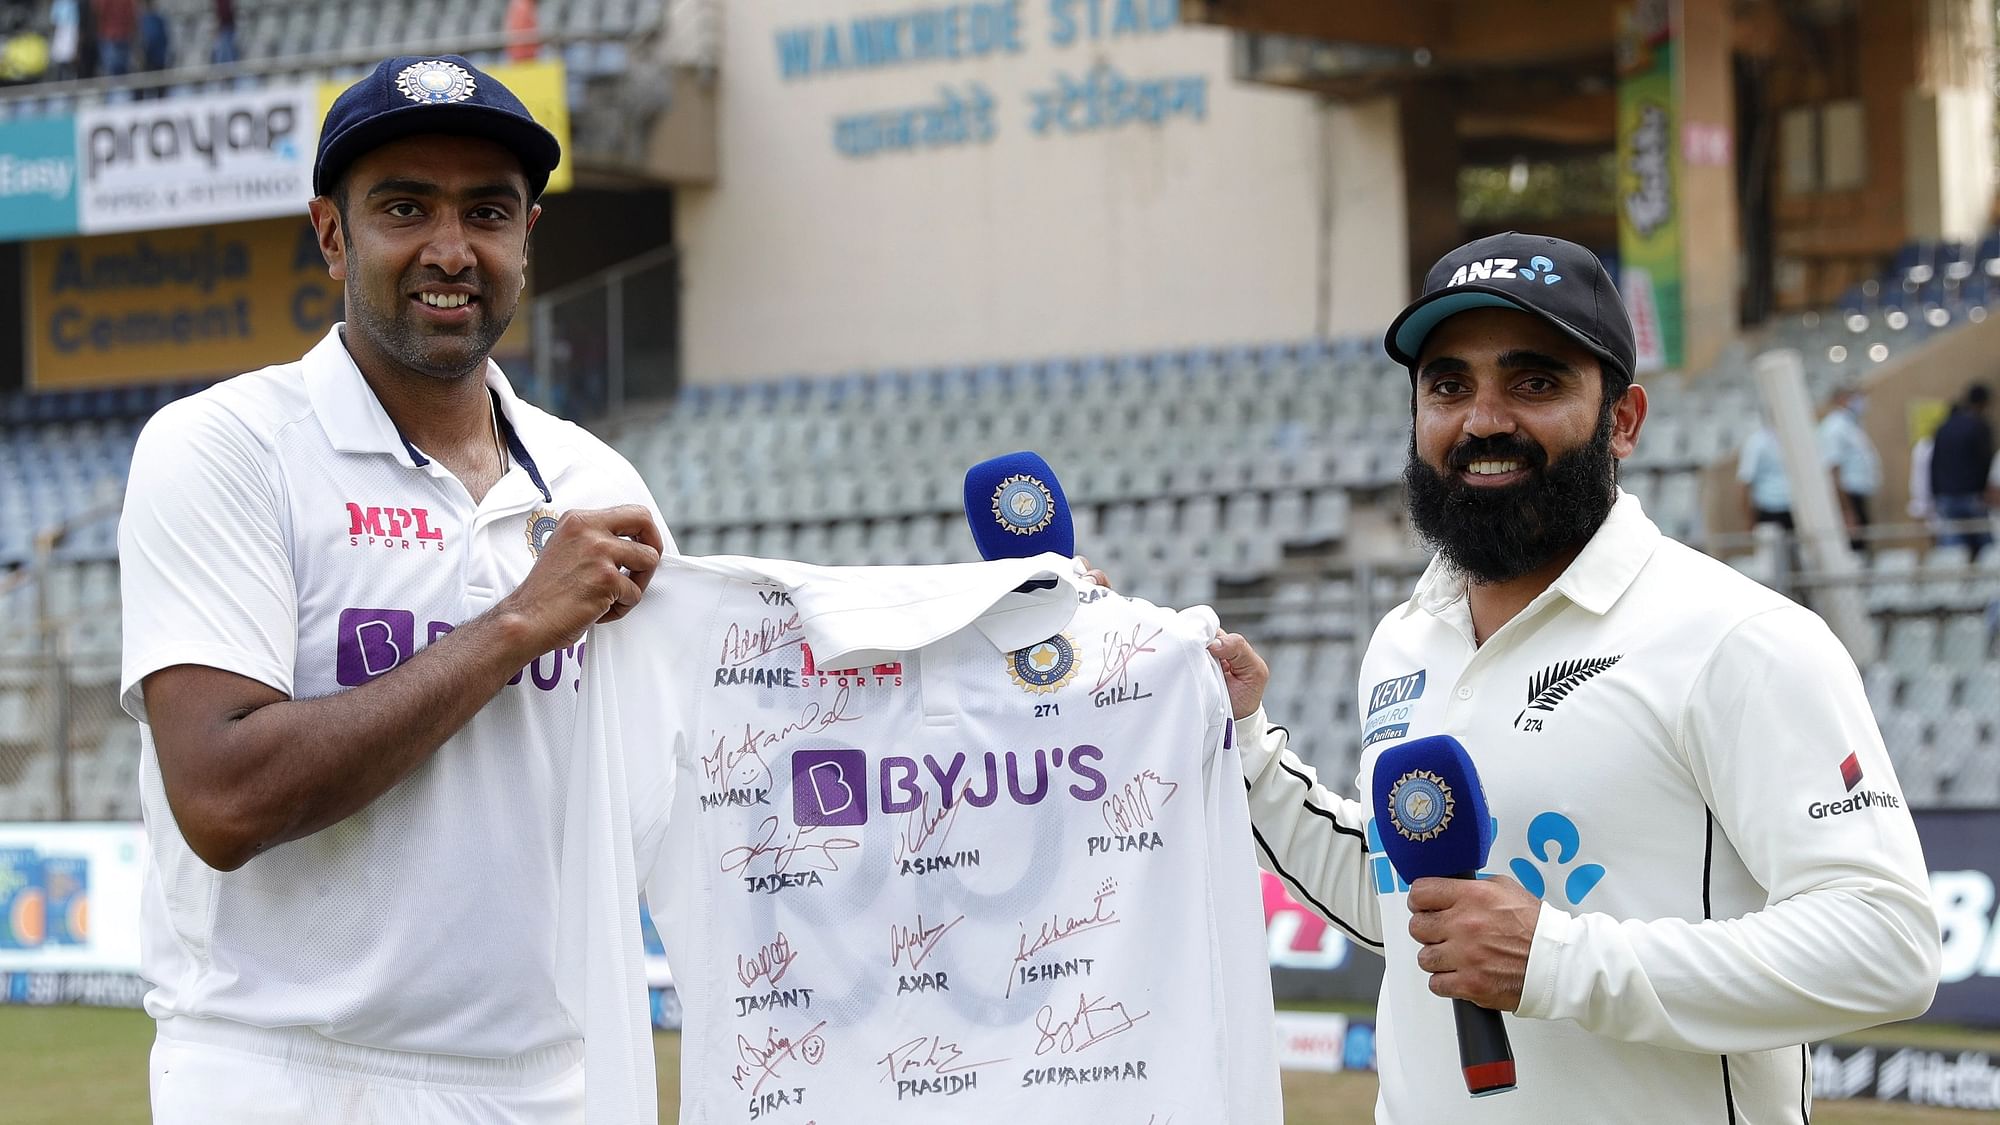 <div class="paragraphs"><p>The Indian team gifted Ajaz Patel a signed jersey as a memento for his historic 10-wicket haul in the Mumbai Test.</p></div>